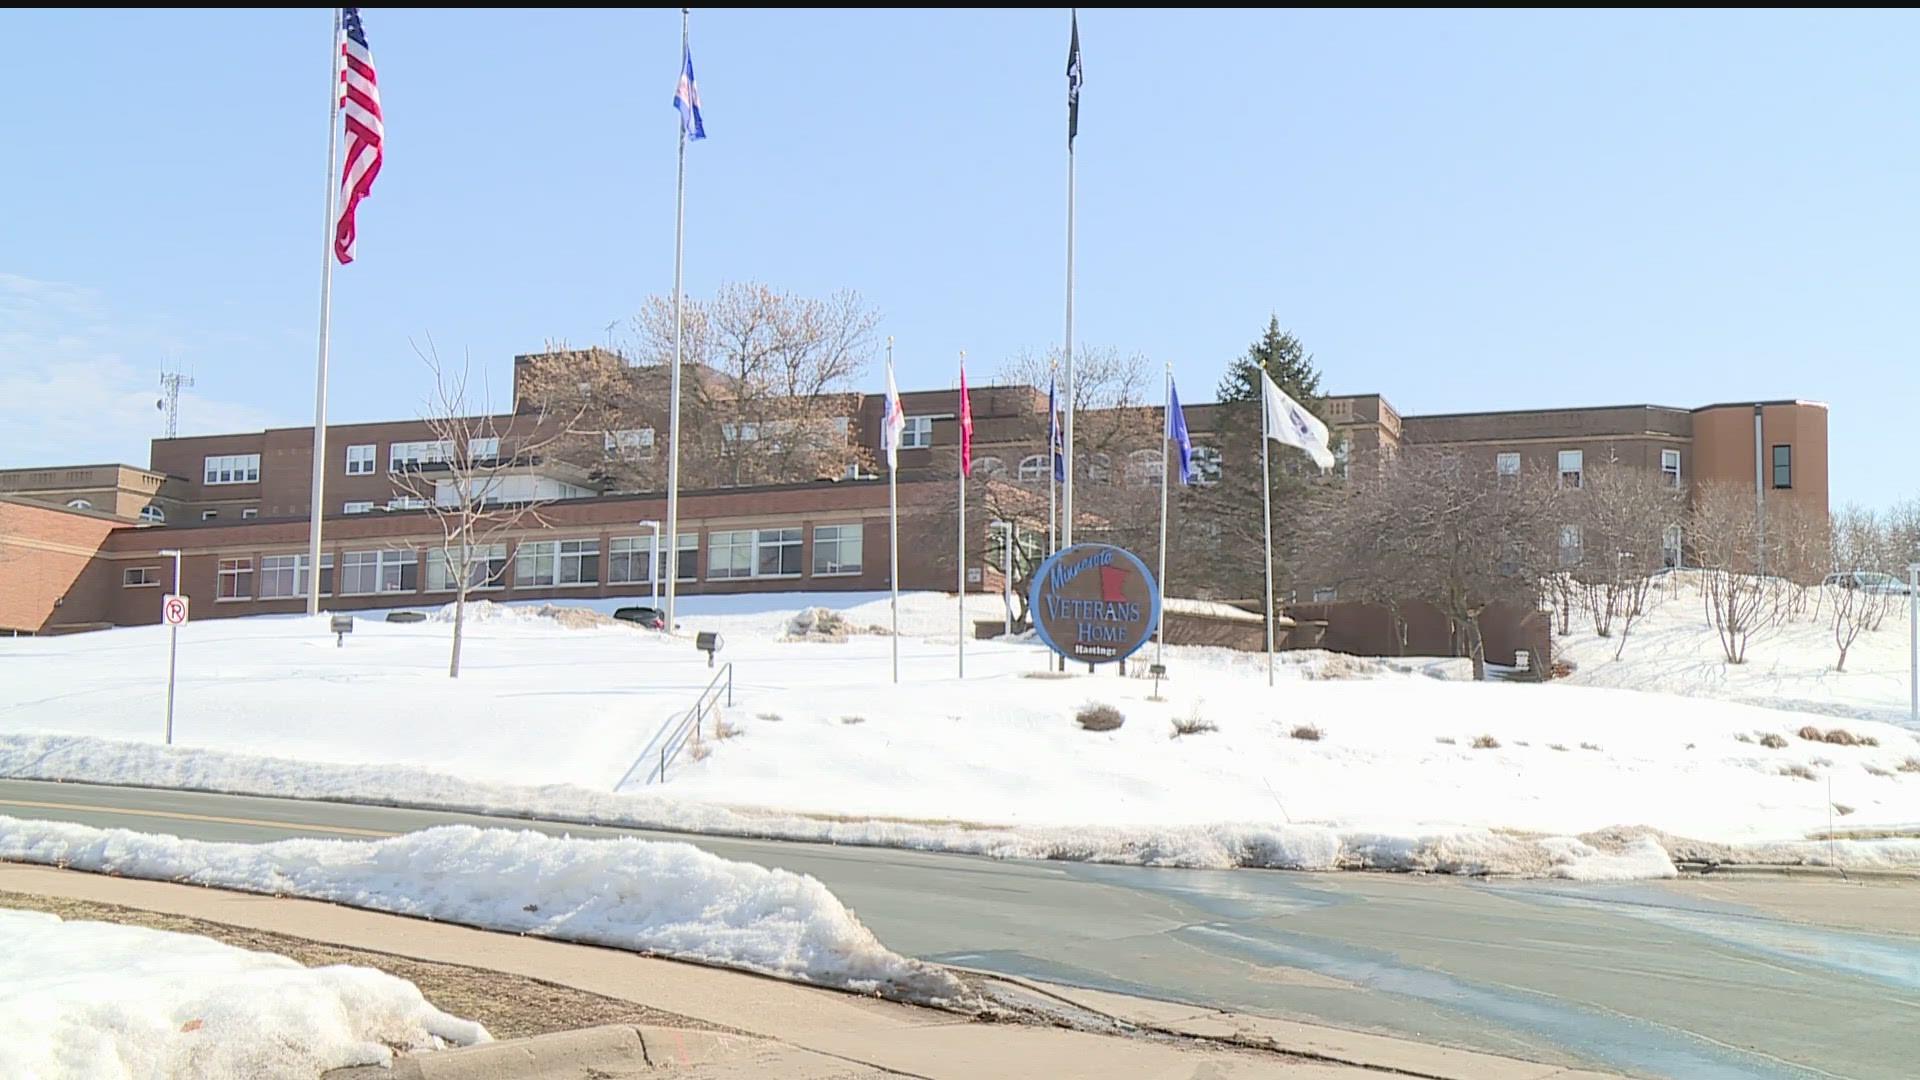 At the state senate, the Veterans Affairs Committee has been questioning a top official about the conditions at the Hastings Veterans Home.